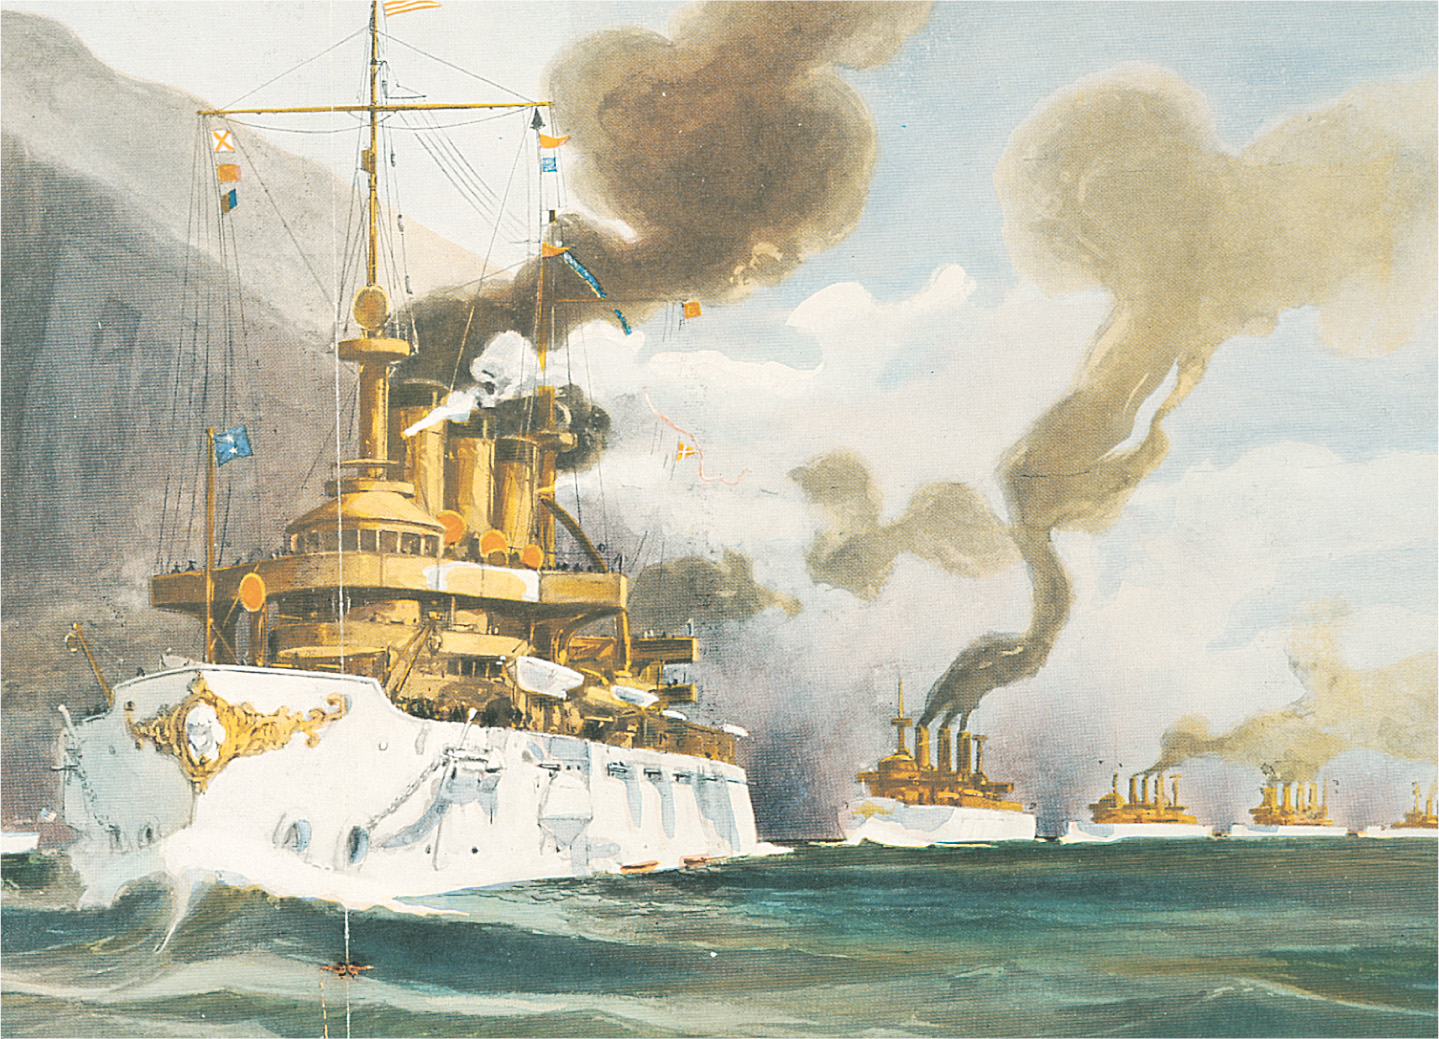 Painting: steamships with white hulls